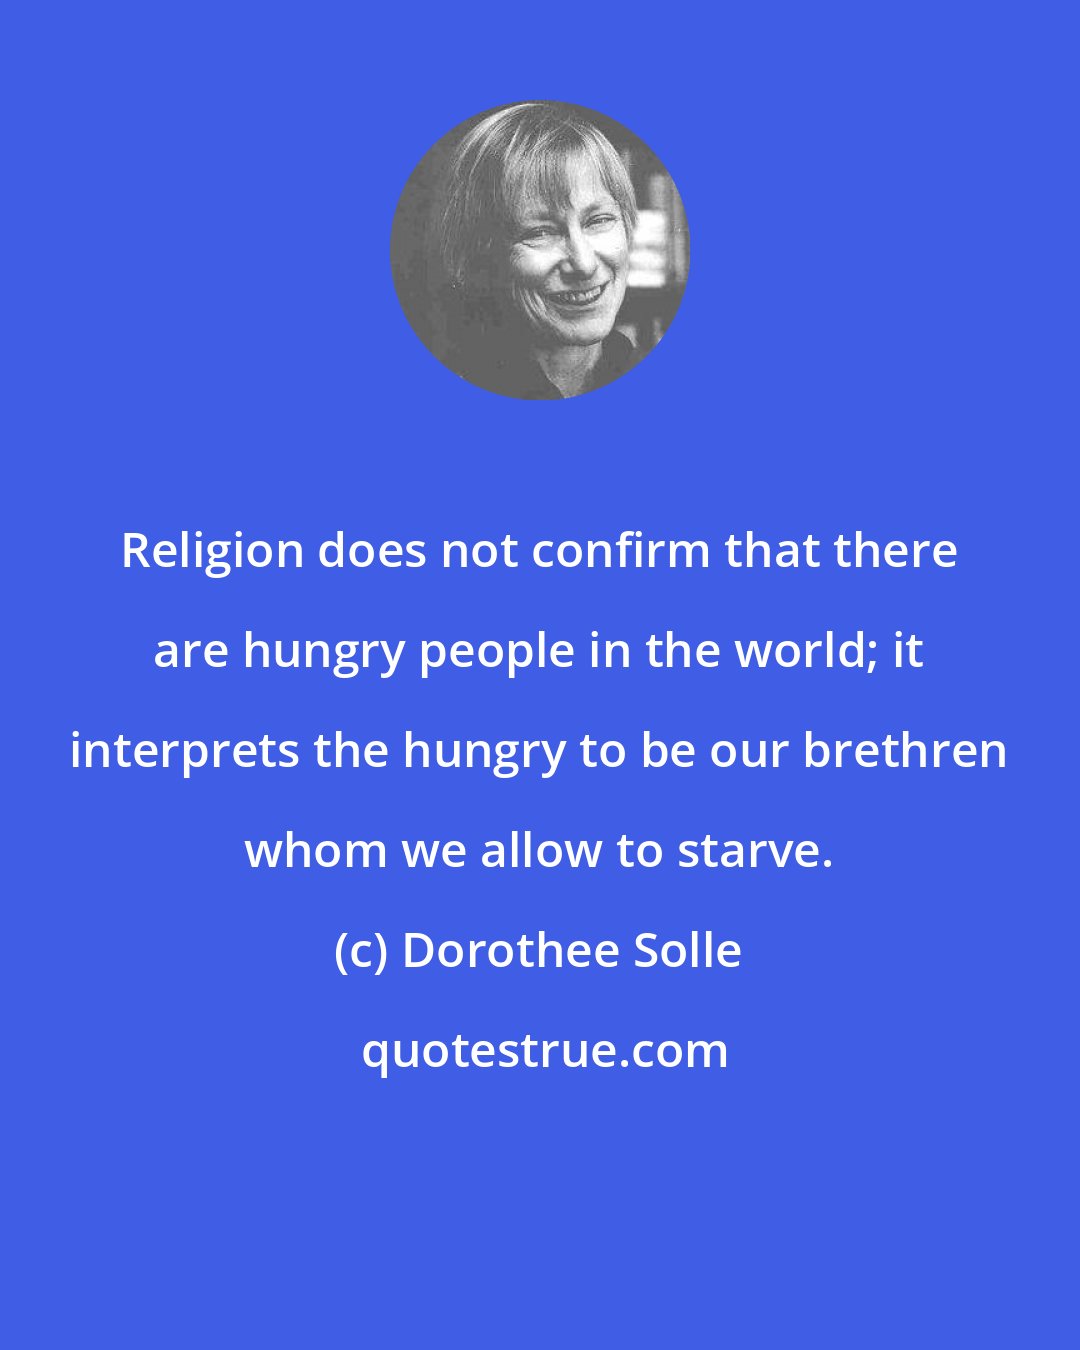 Dorothee Solle: Religion does not confirm that there are hungry people in the world; it interprets the hungry to be our brethren whom we allow to starve.